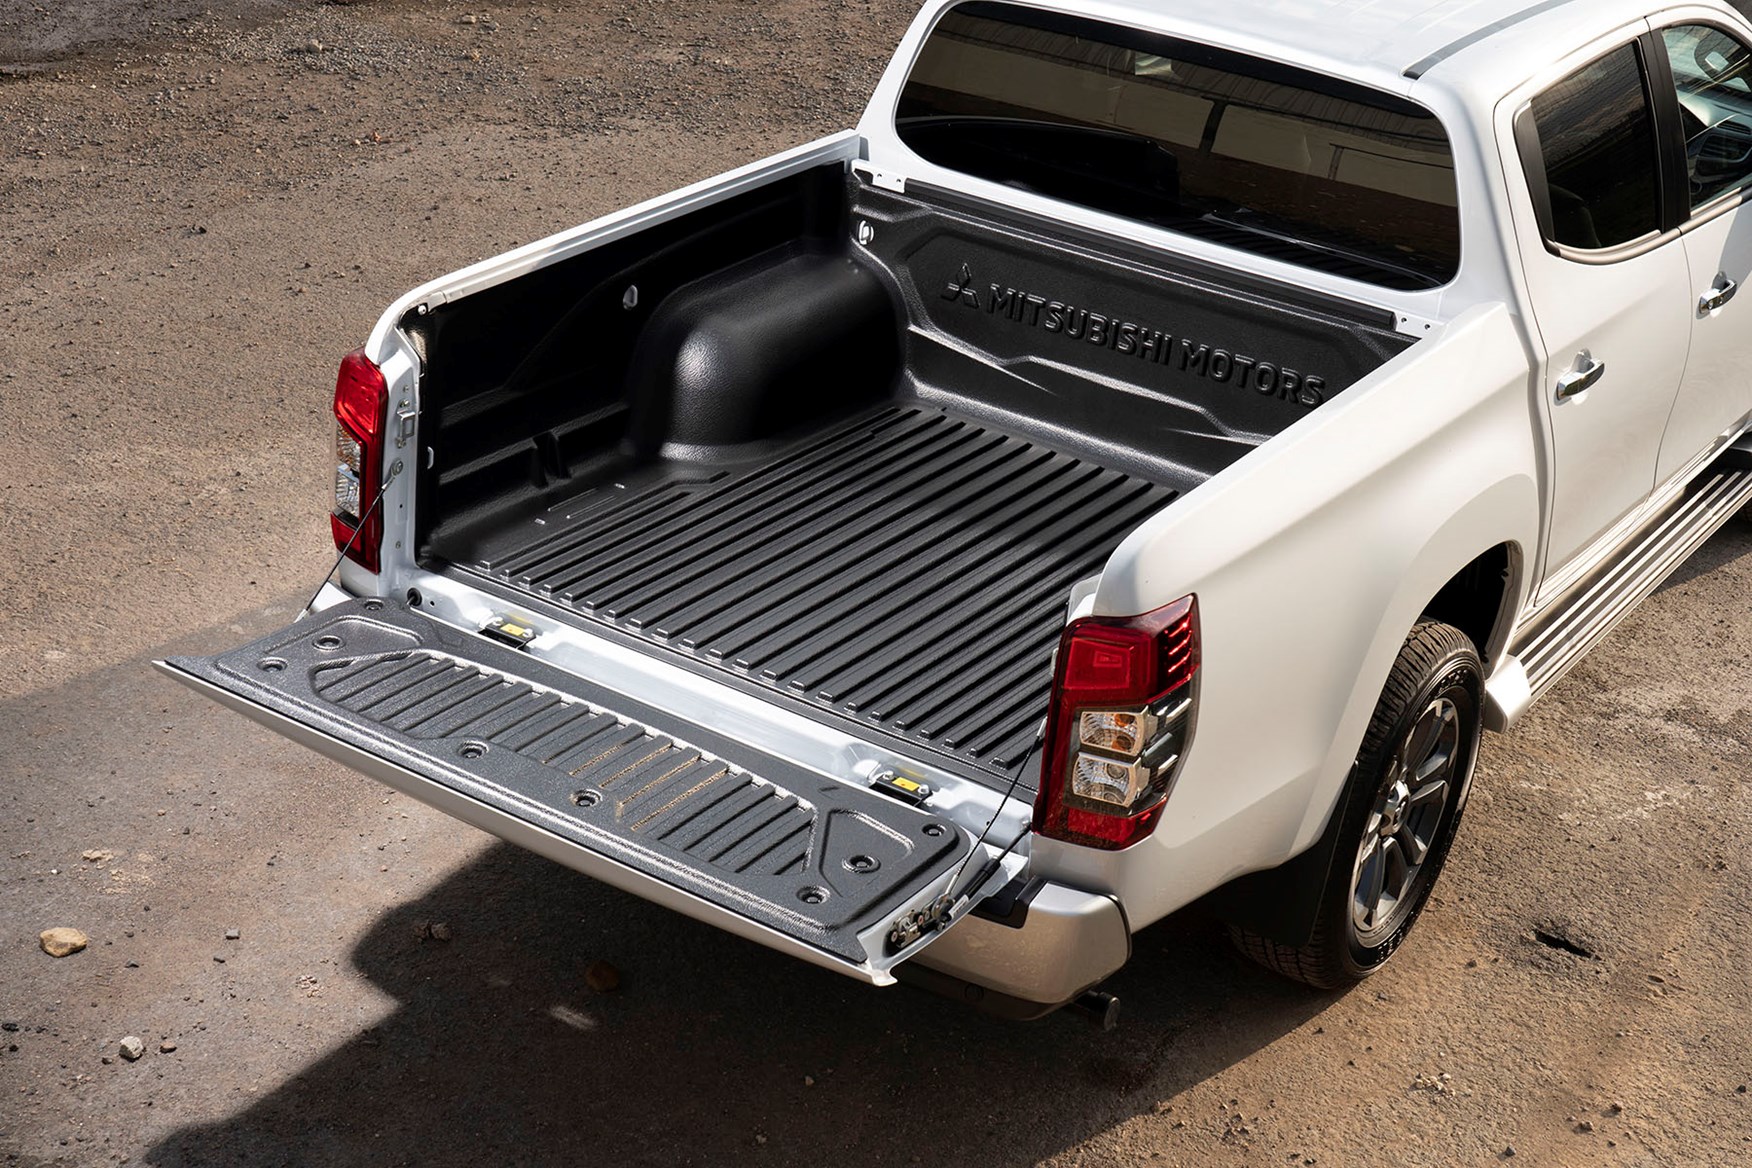 2019 Mitsubishi L200 Series 6, rear load bed, white, with liner